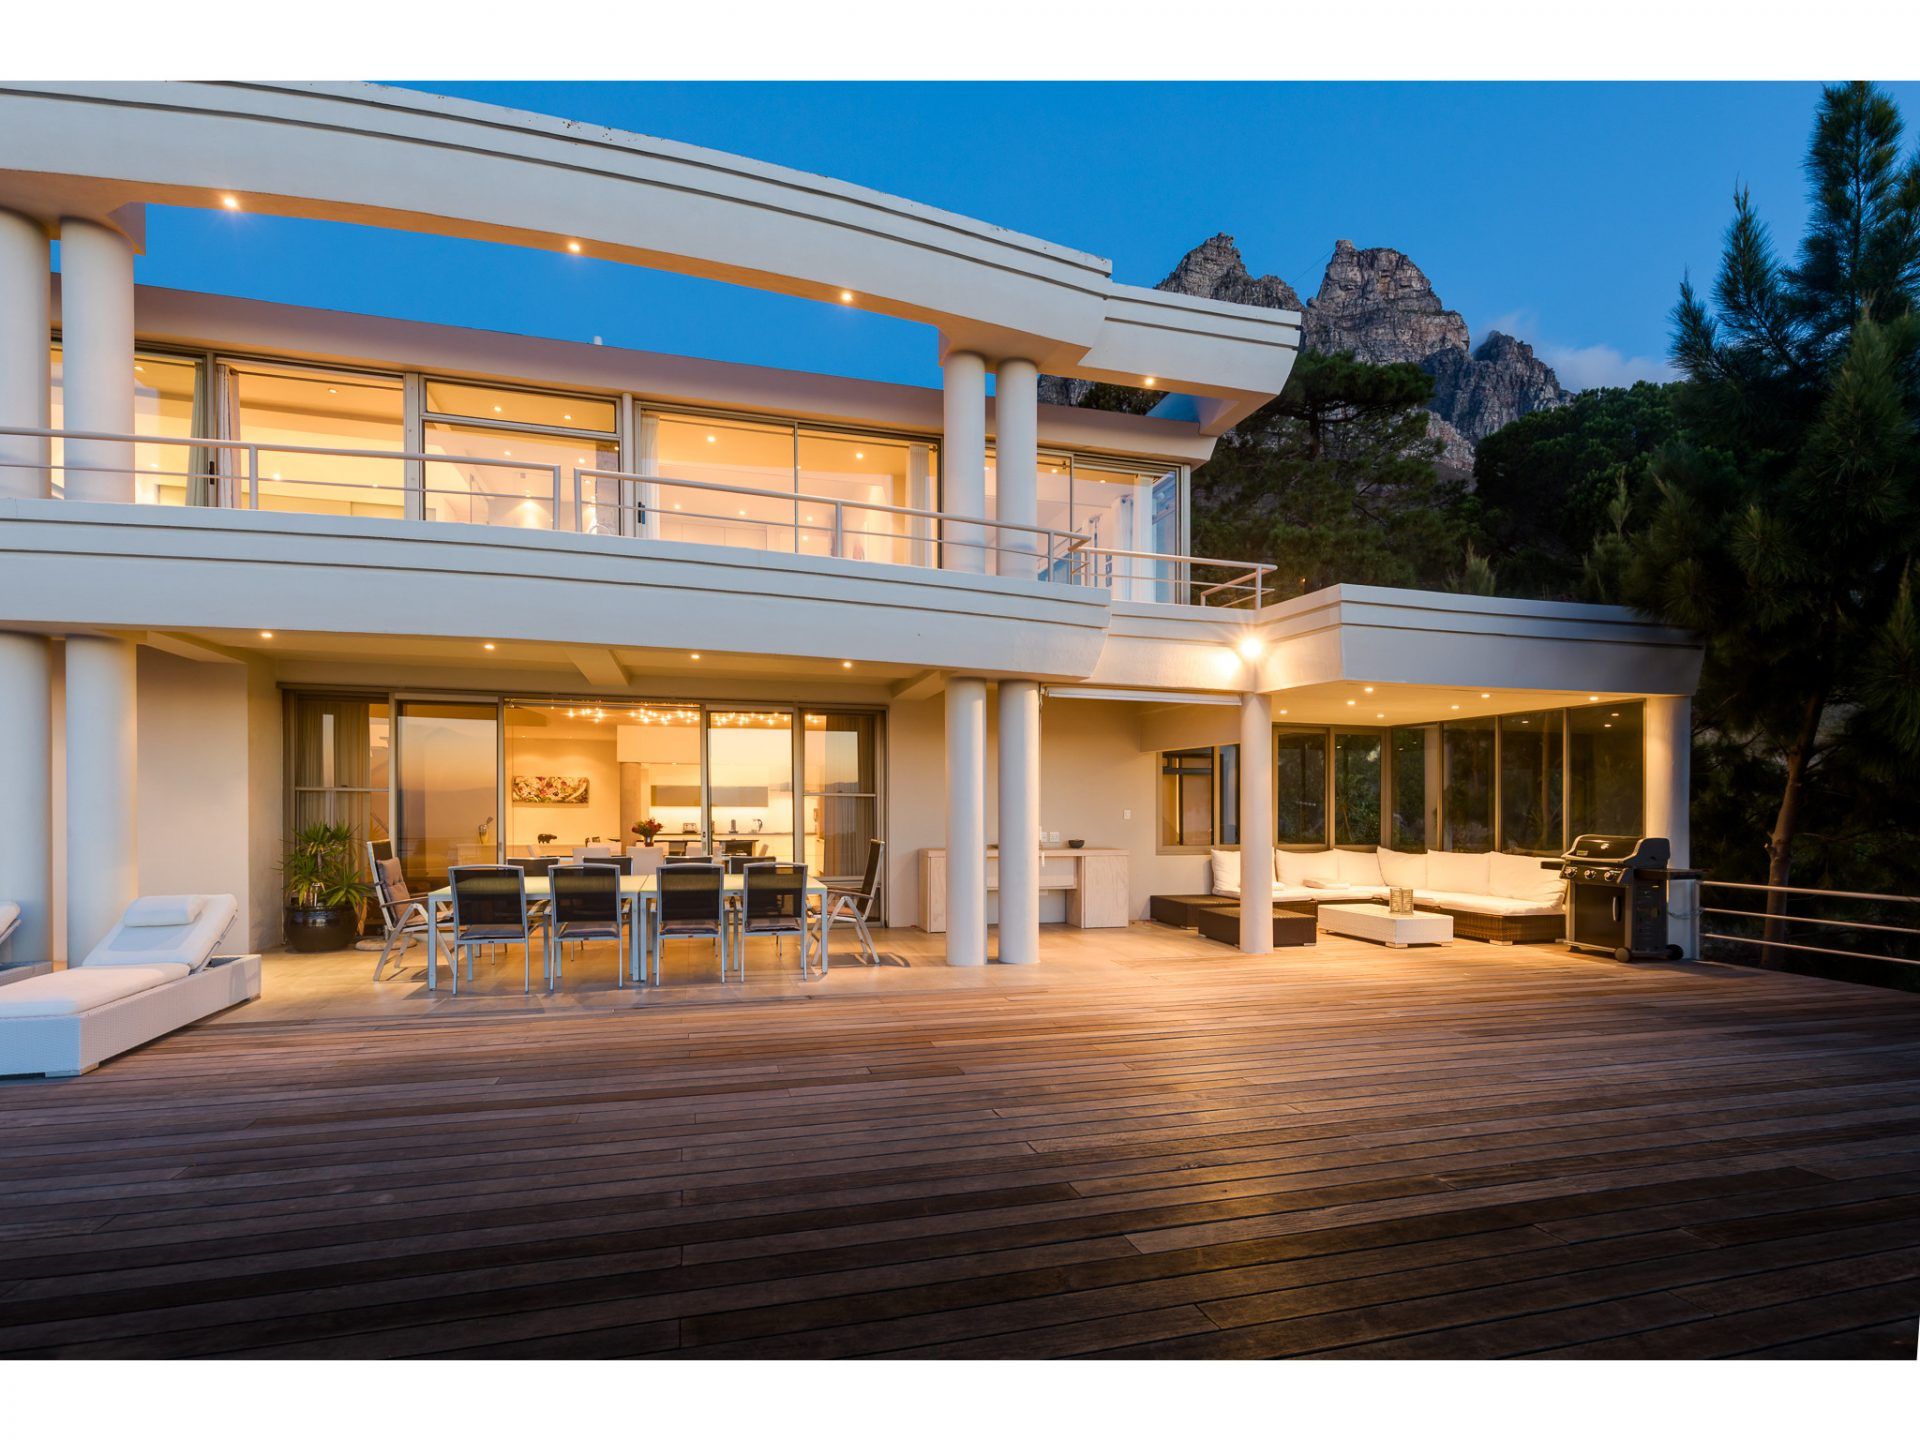 Photo 19 of Geneva Sunsets accommodation in Camps Bay, Cape Town with 6 bedrooms and 7 bathrooms